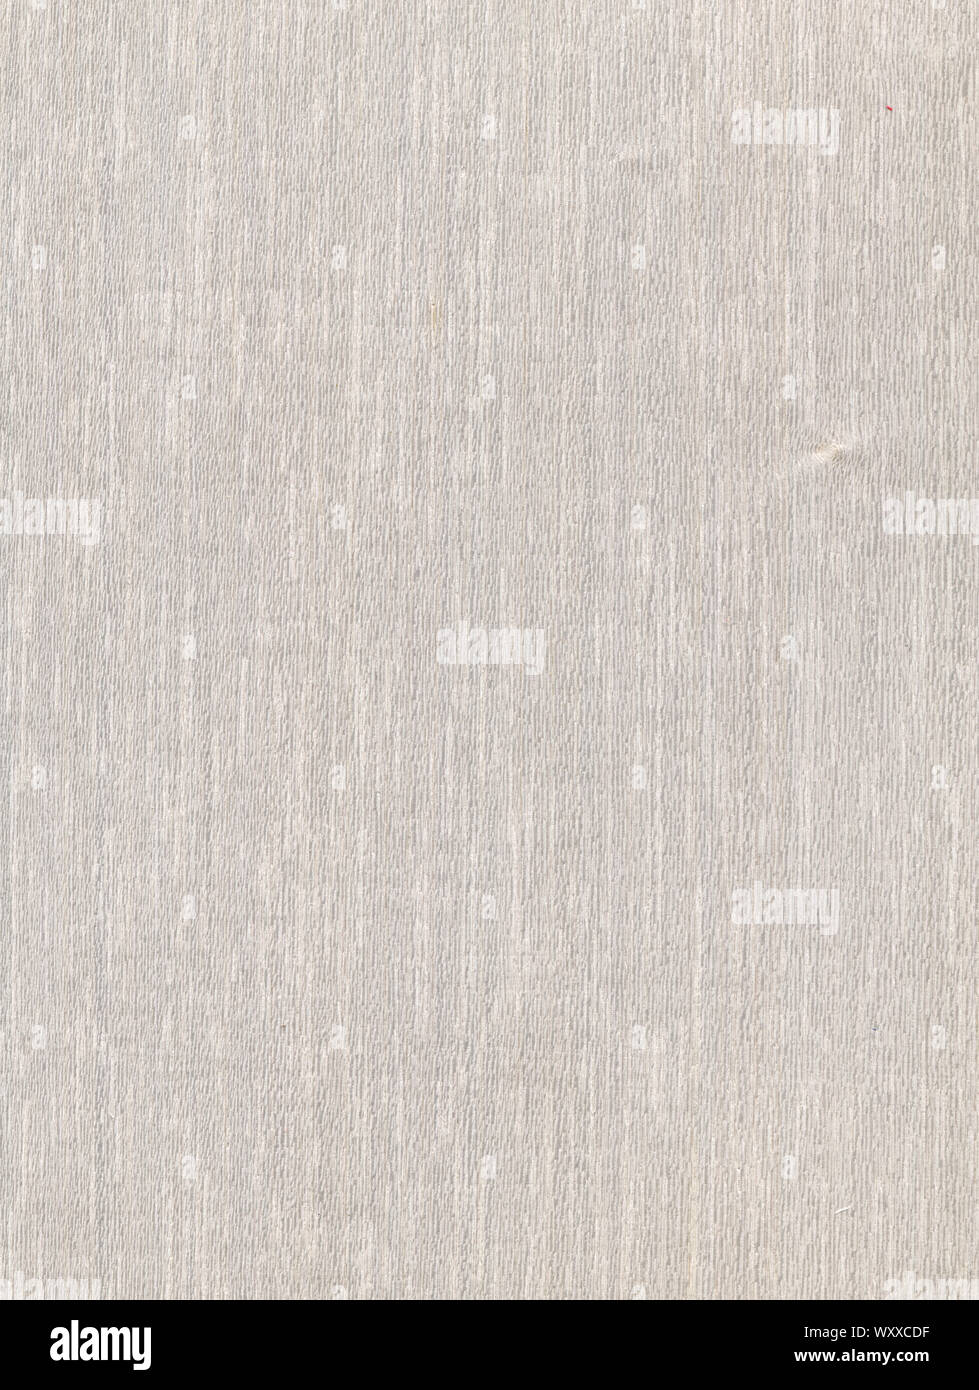 Natural wooden texture background. Koto wood, African Pterygota. Stock Photo